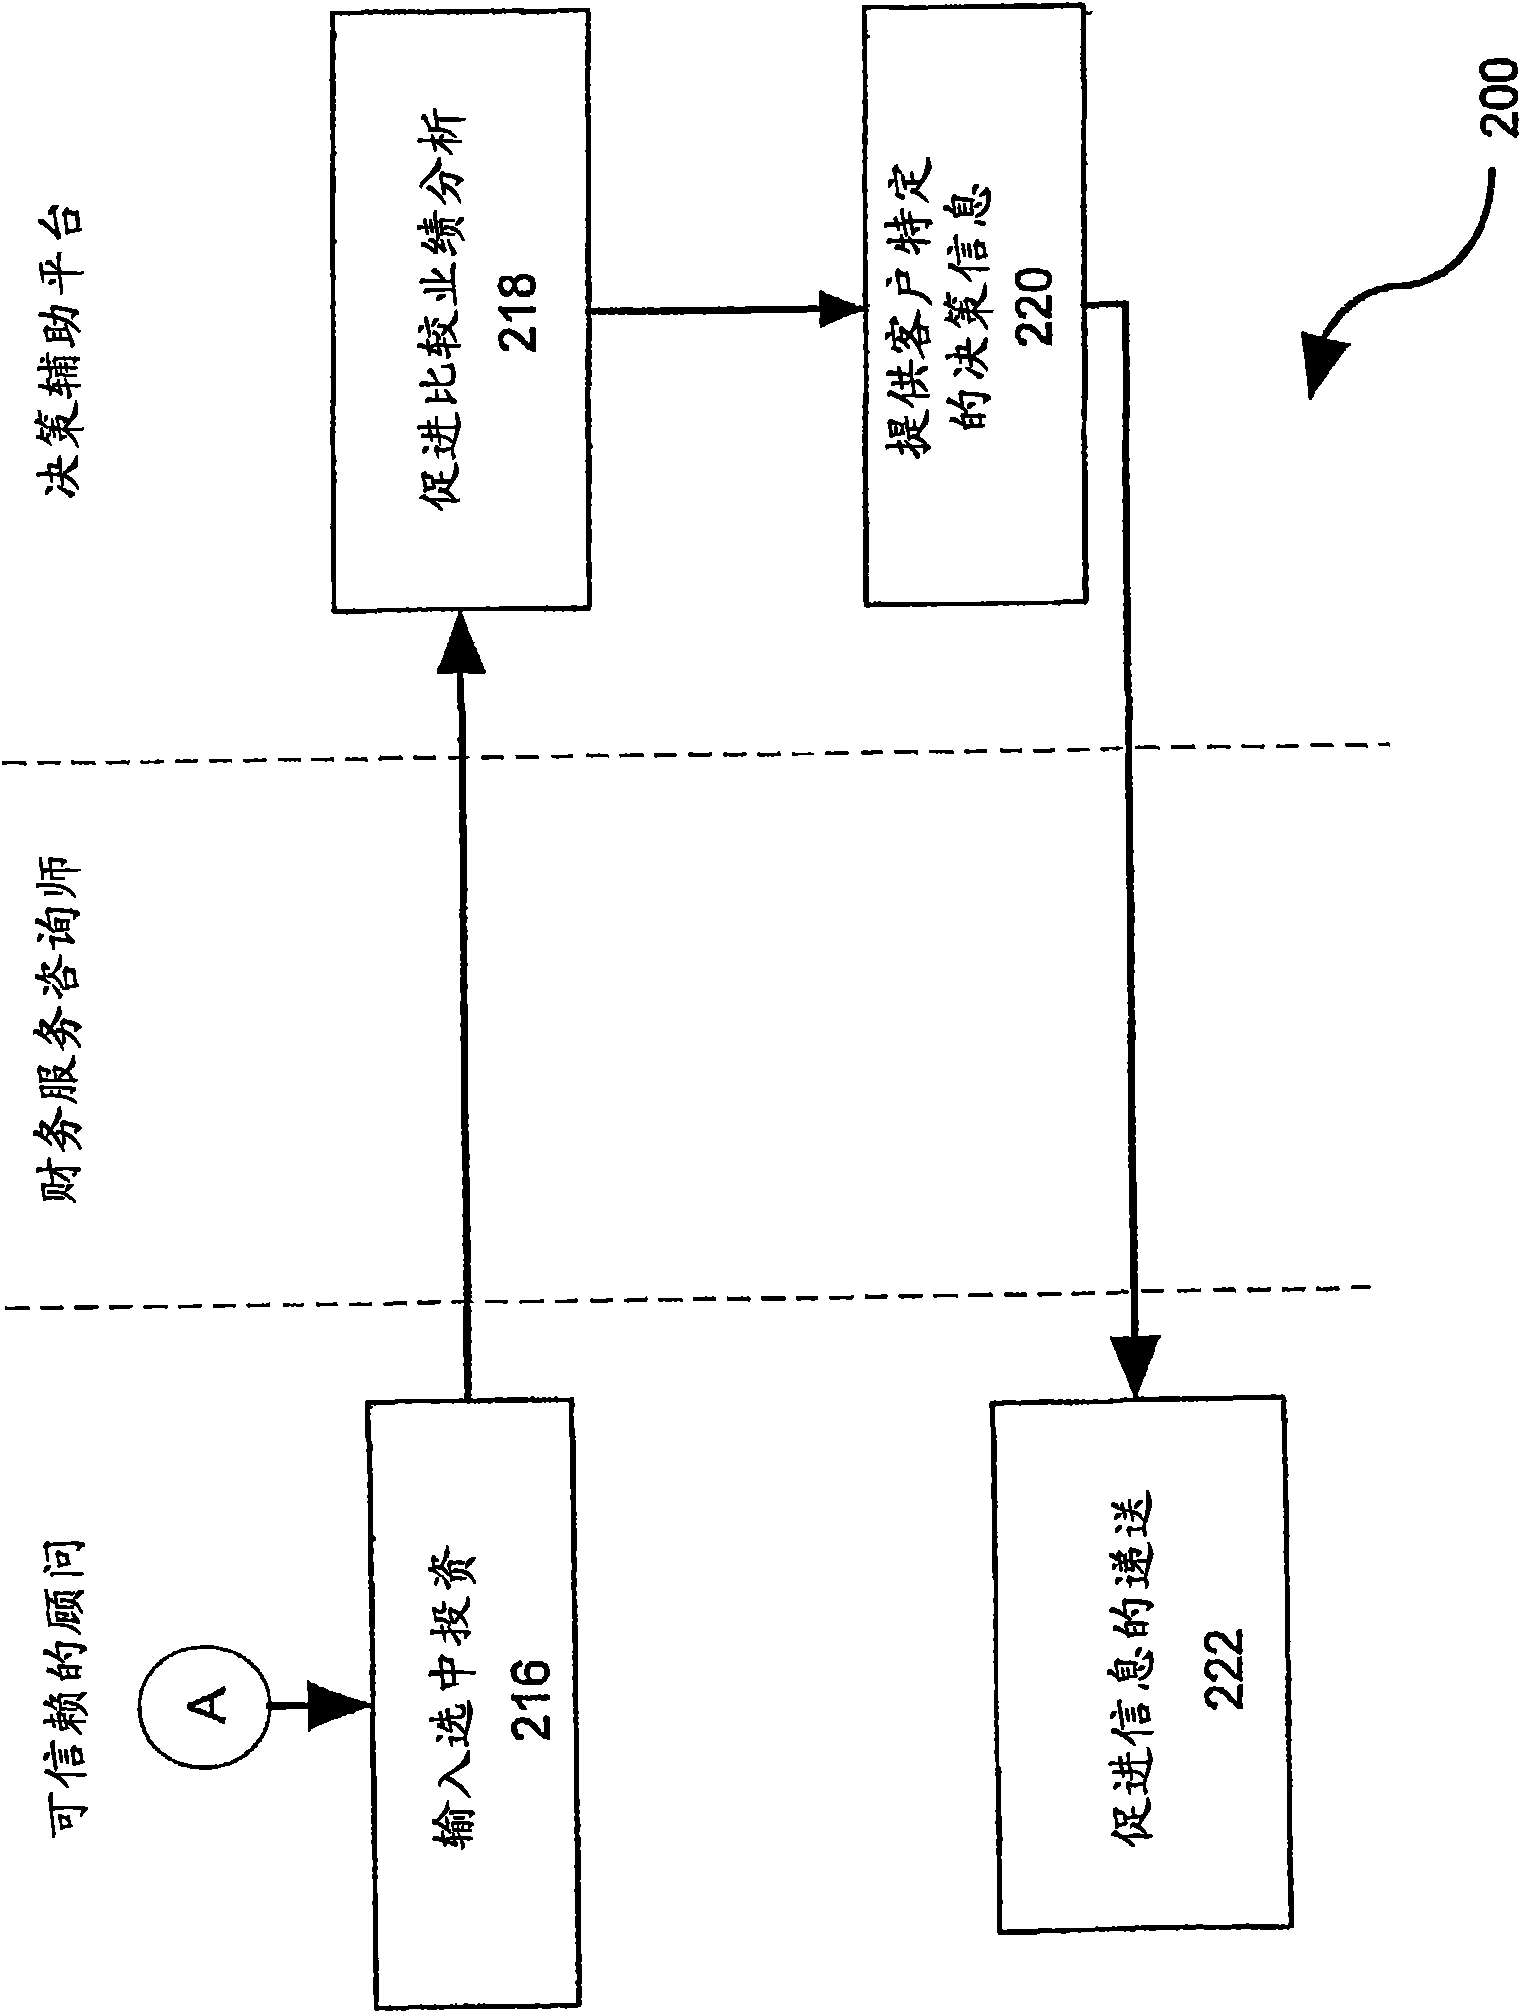 Decision assistance platform configured for facilitating financial consulting services